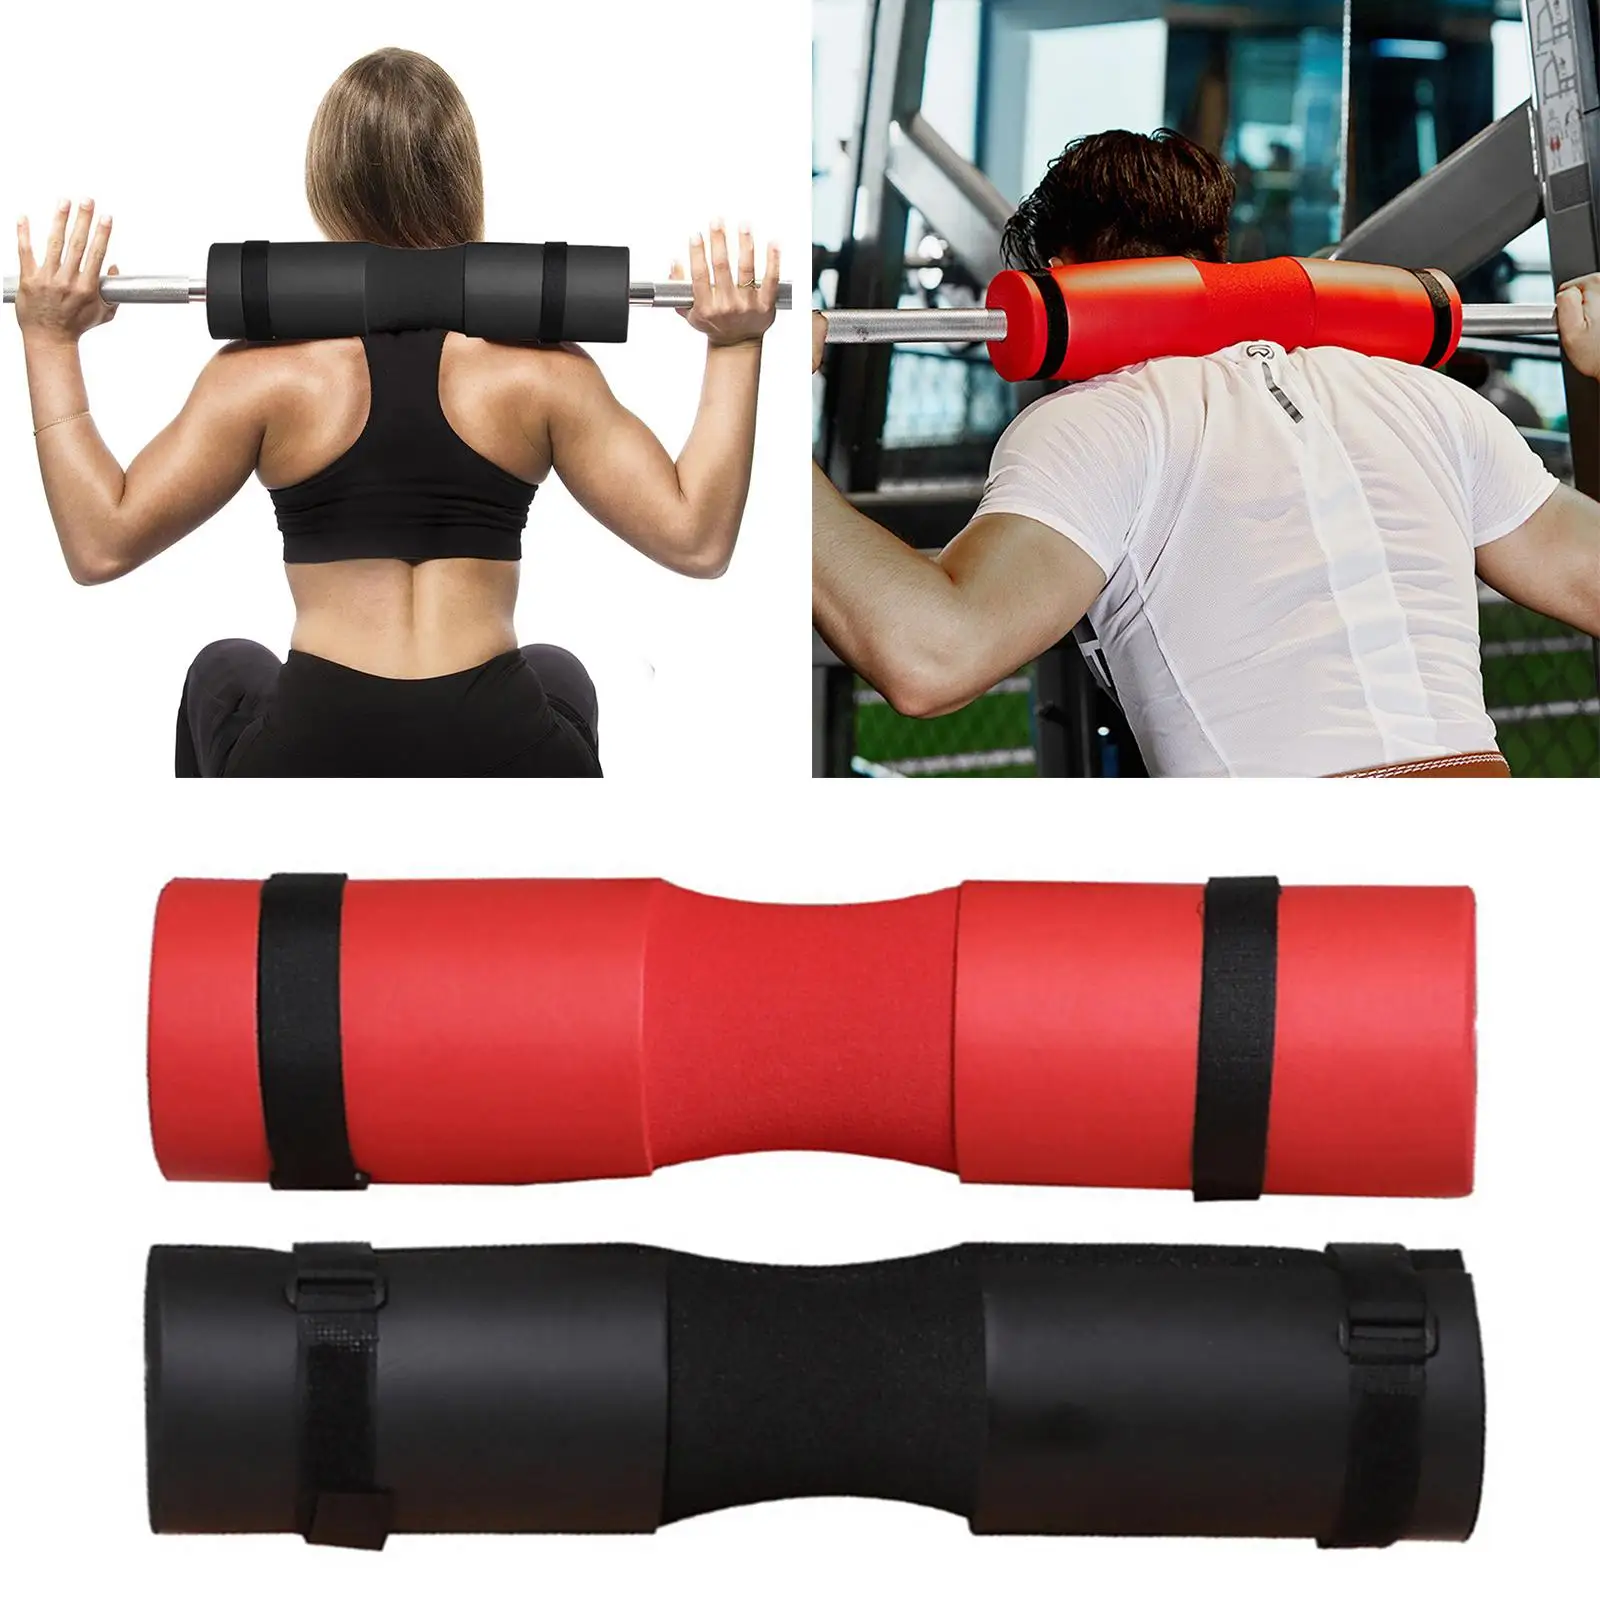 Standard Barbell Pad with  Straps Webbing Advanced  Foam Sponge Protective Pad Cushion Protective Grip Accessories